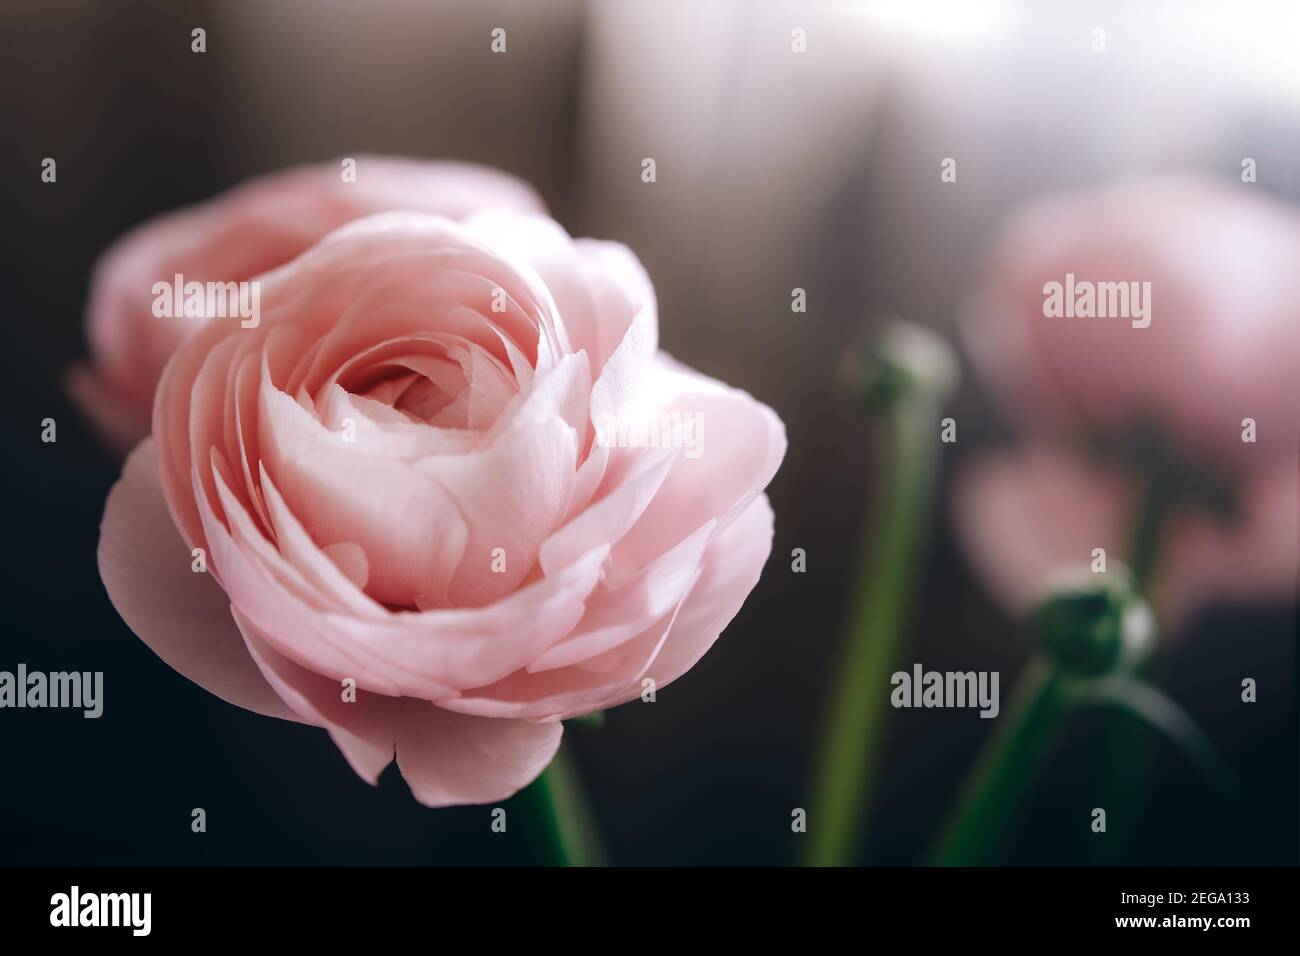 Ranunculus pale pink spring flowers close-up background. Walpaper, space for text. Stock Photo